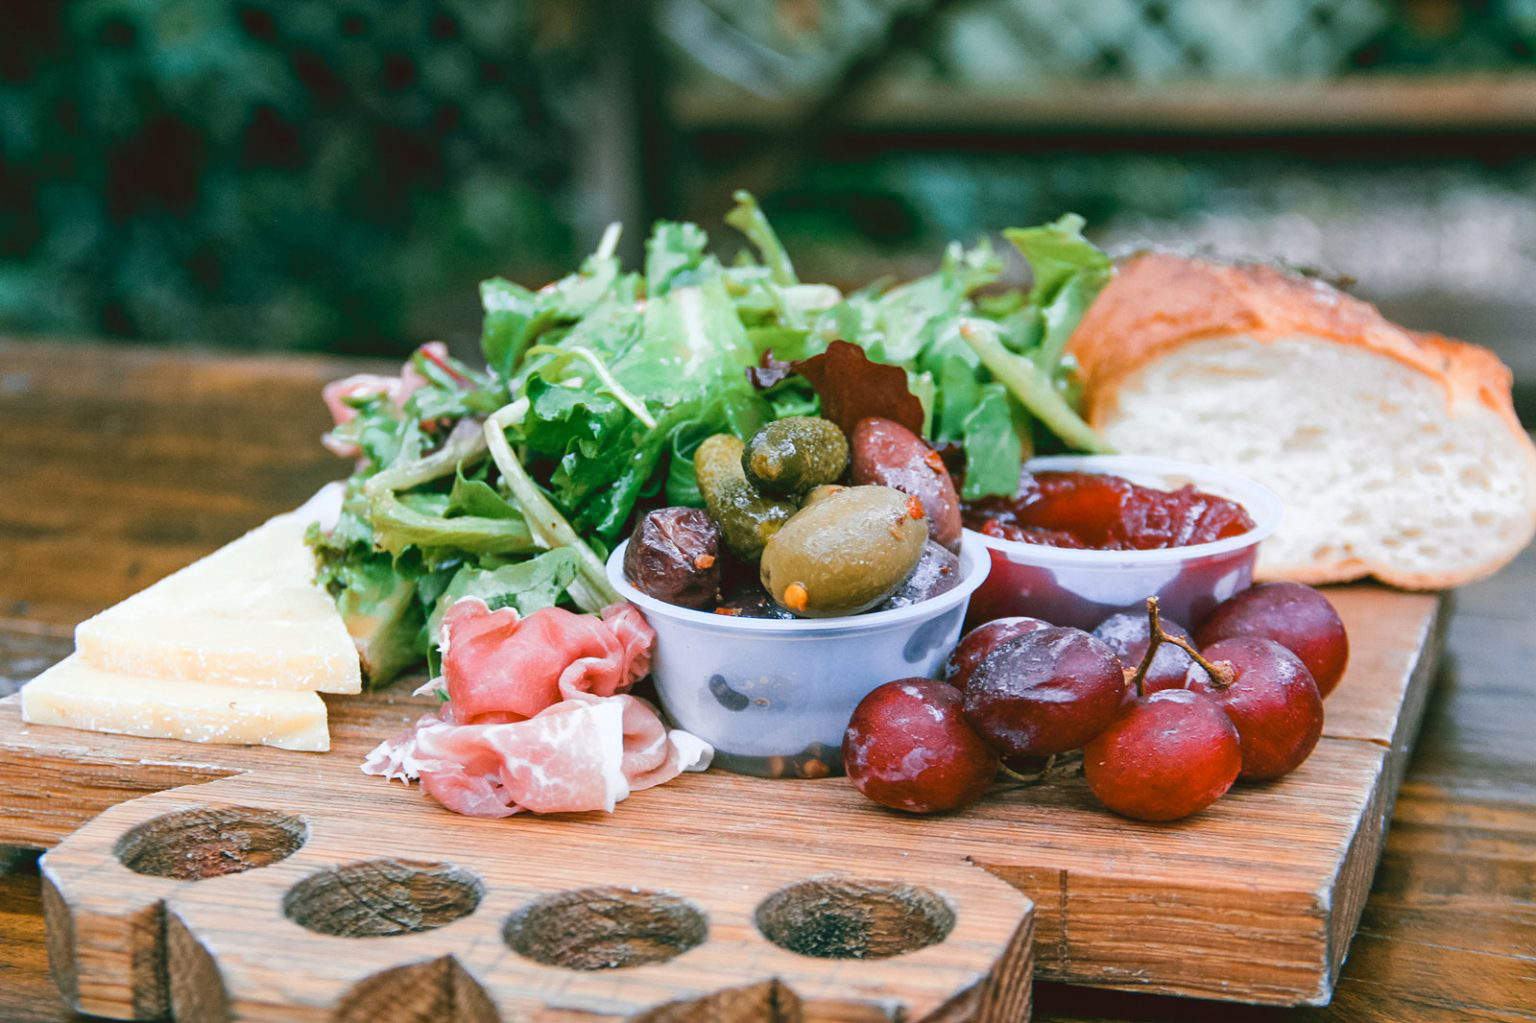 Meat and cheese board with bread, lettuce and grapes.